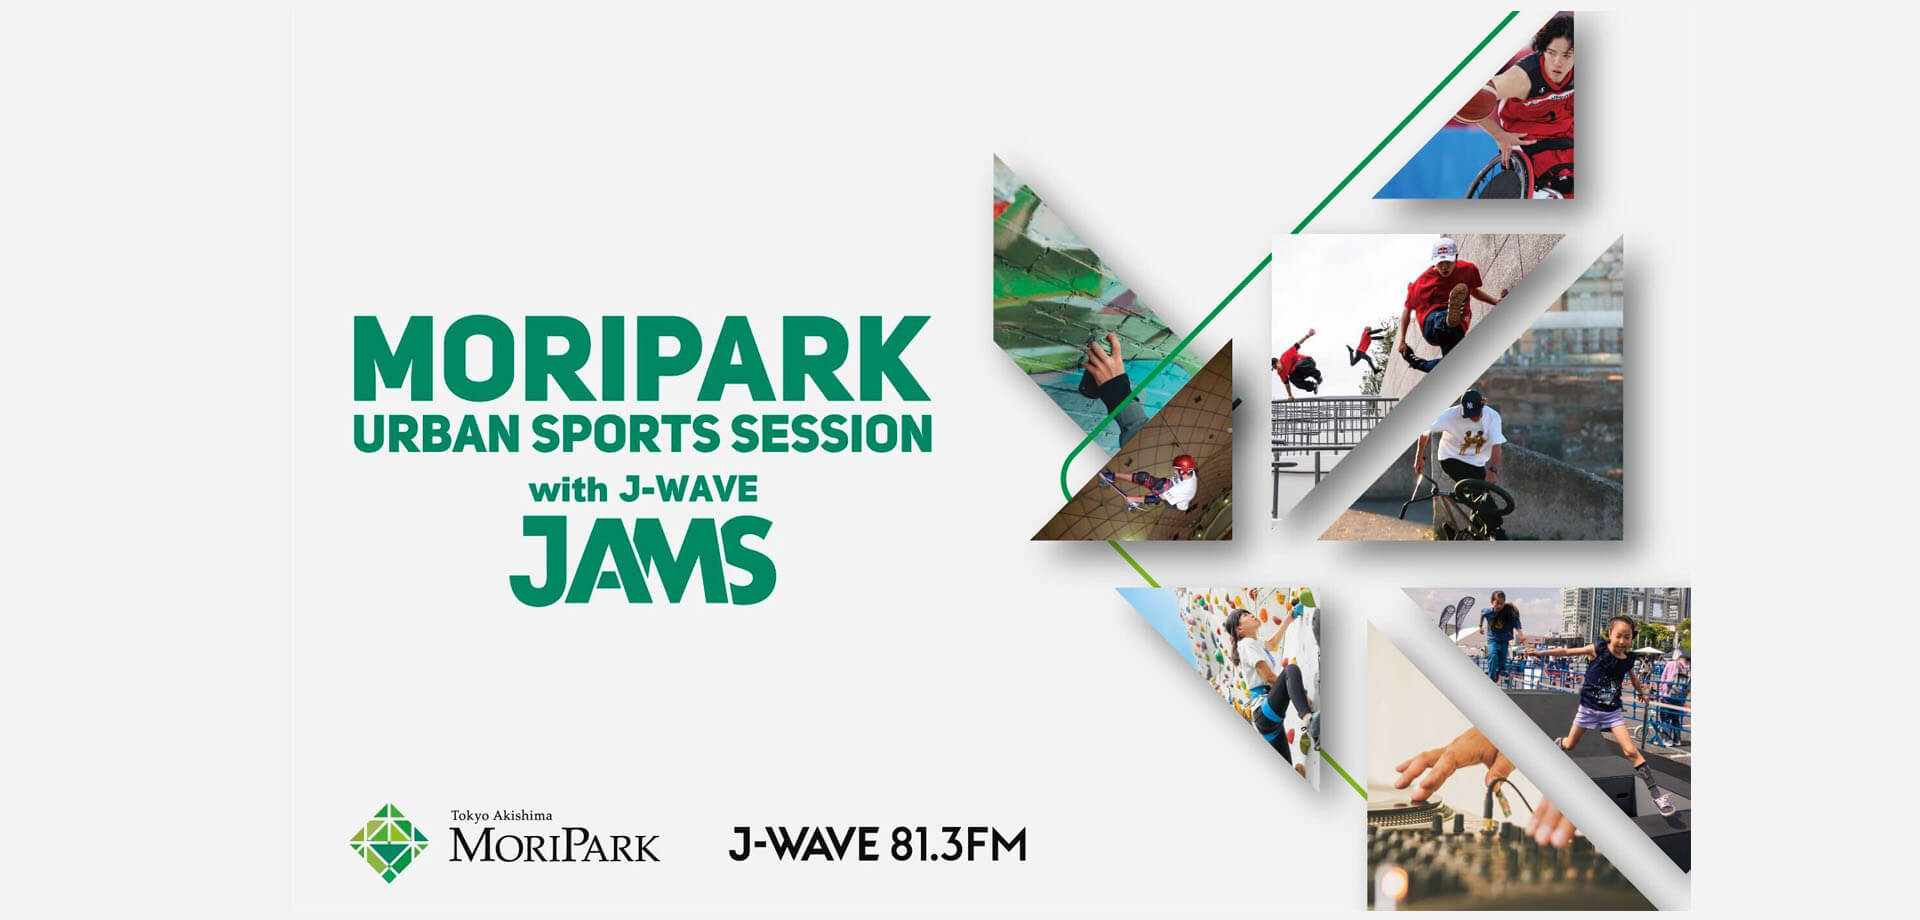 MORIPARK URBAN SPORTS SESSION with J-WAVE “JAMS” 東京・昭島 モリパーク